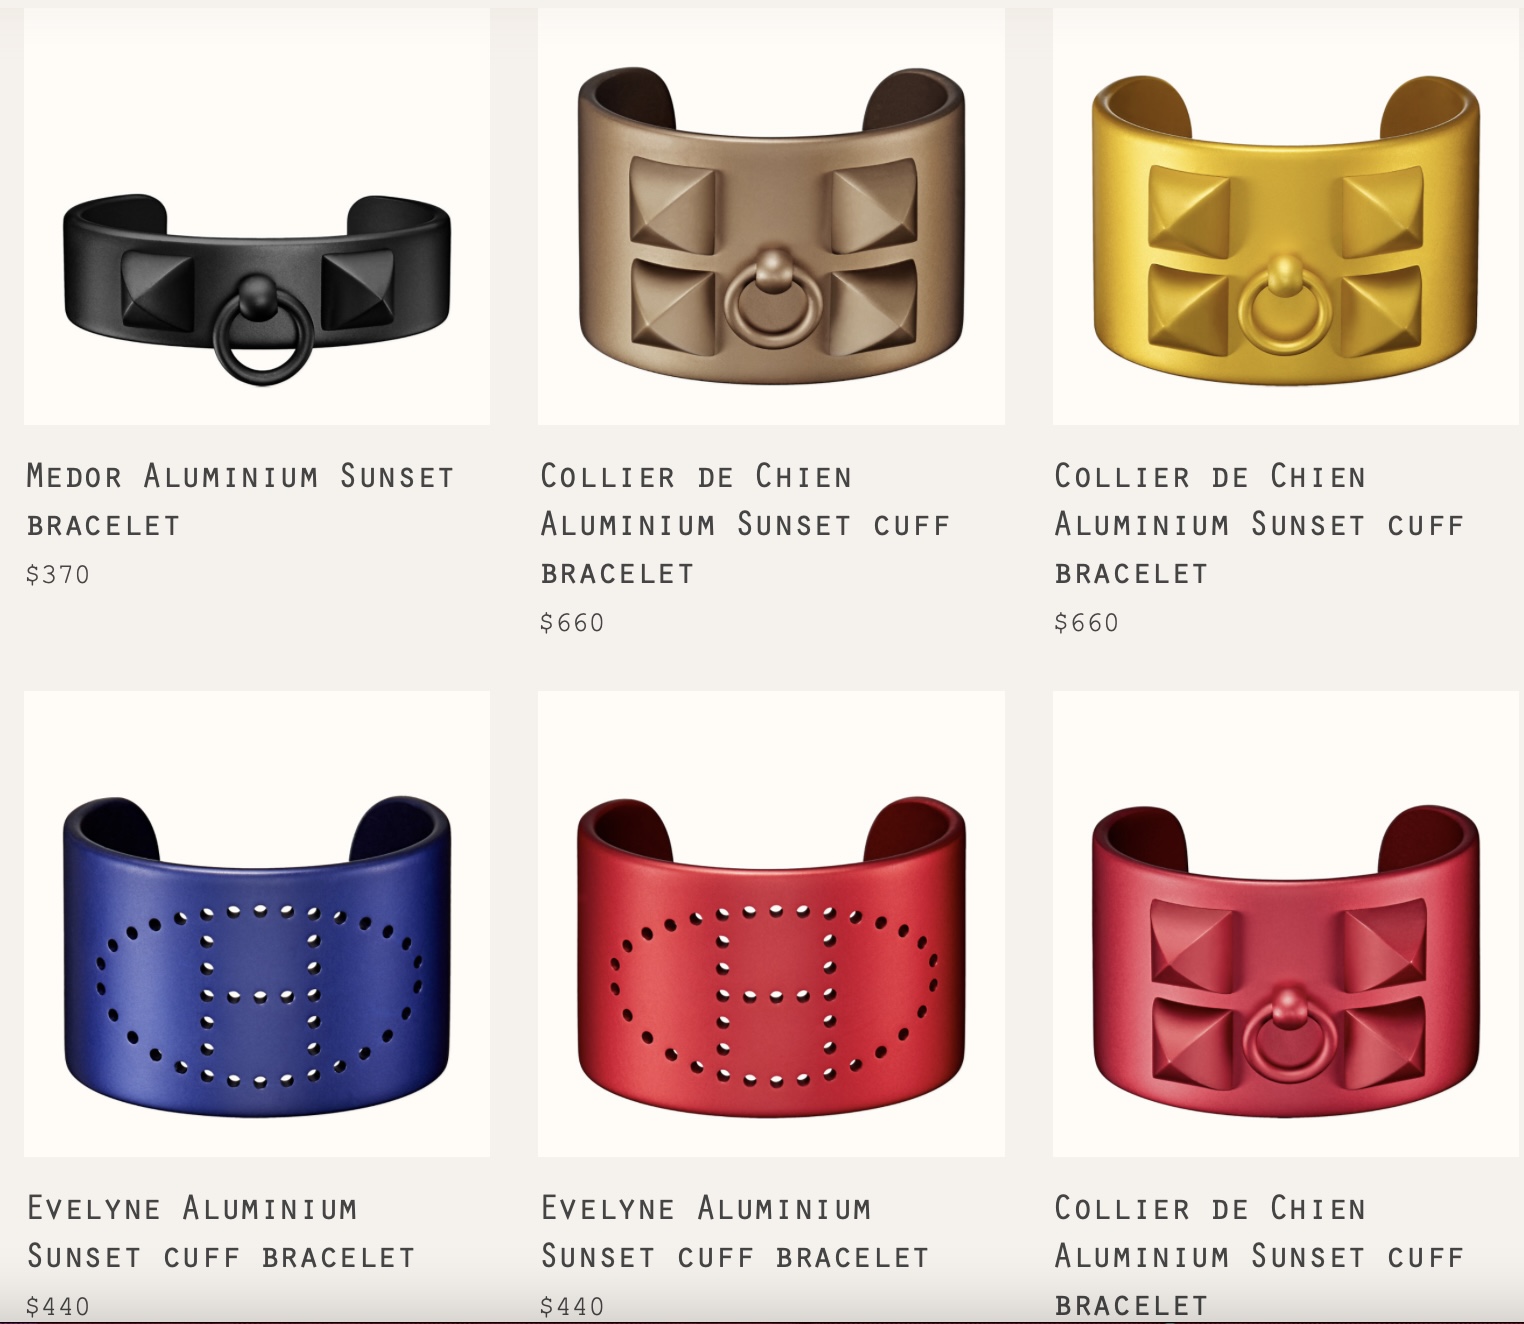 Various Aluminum Sunset Cuffs currently available at Hermes.com. Gotta warn you, the sizing can be tricky on these.